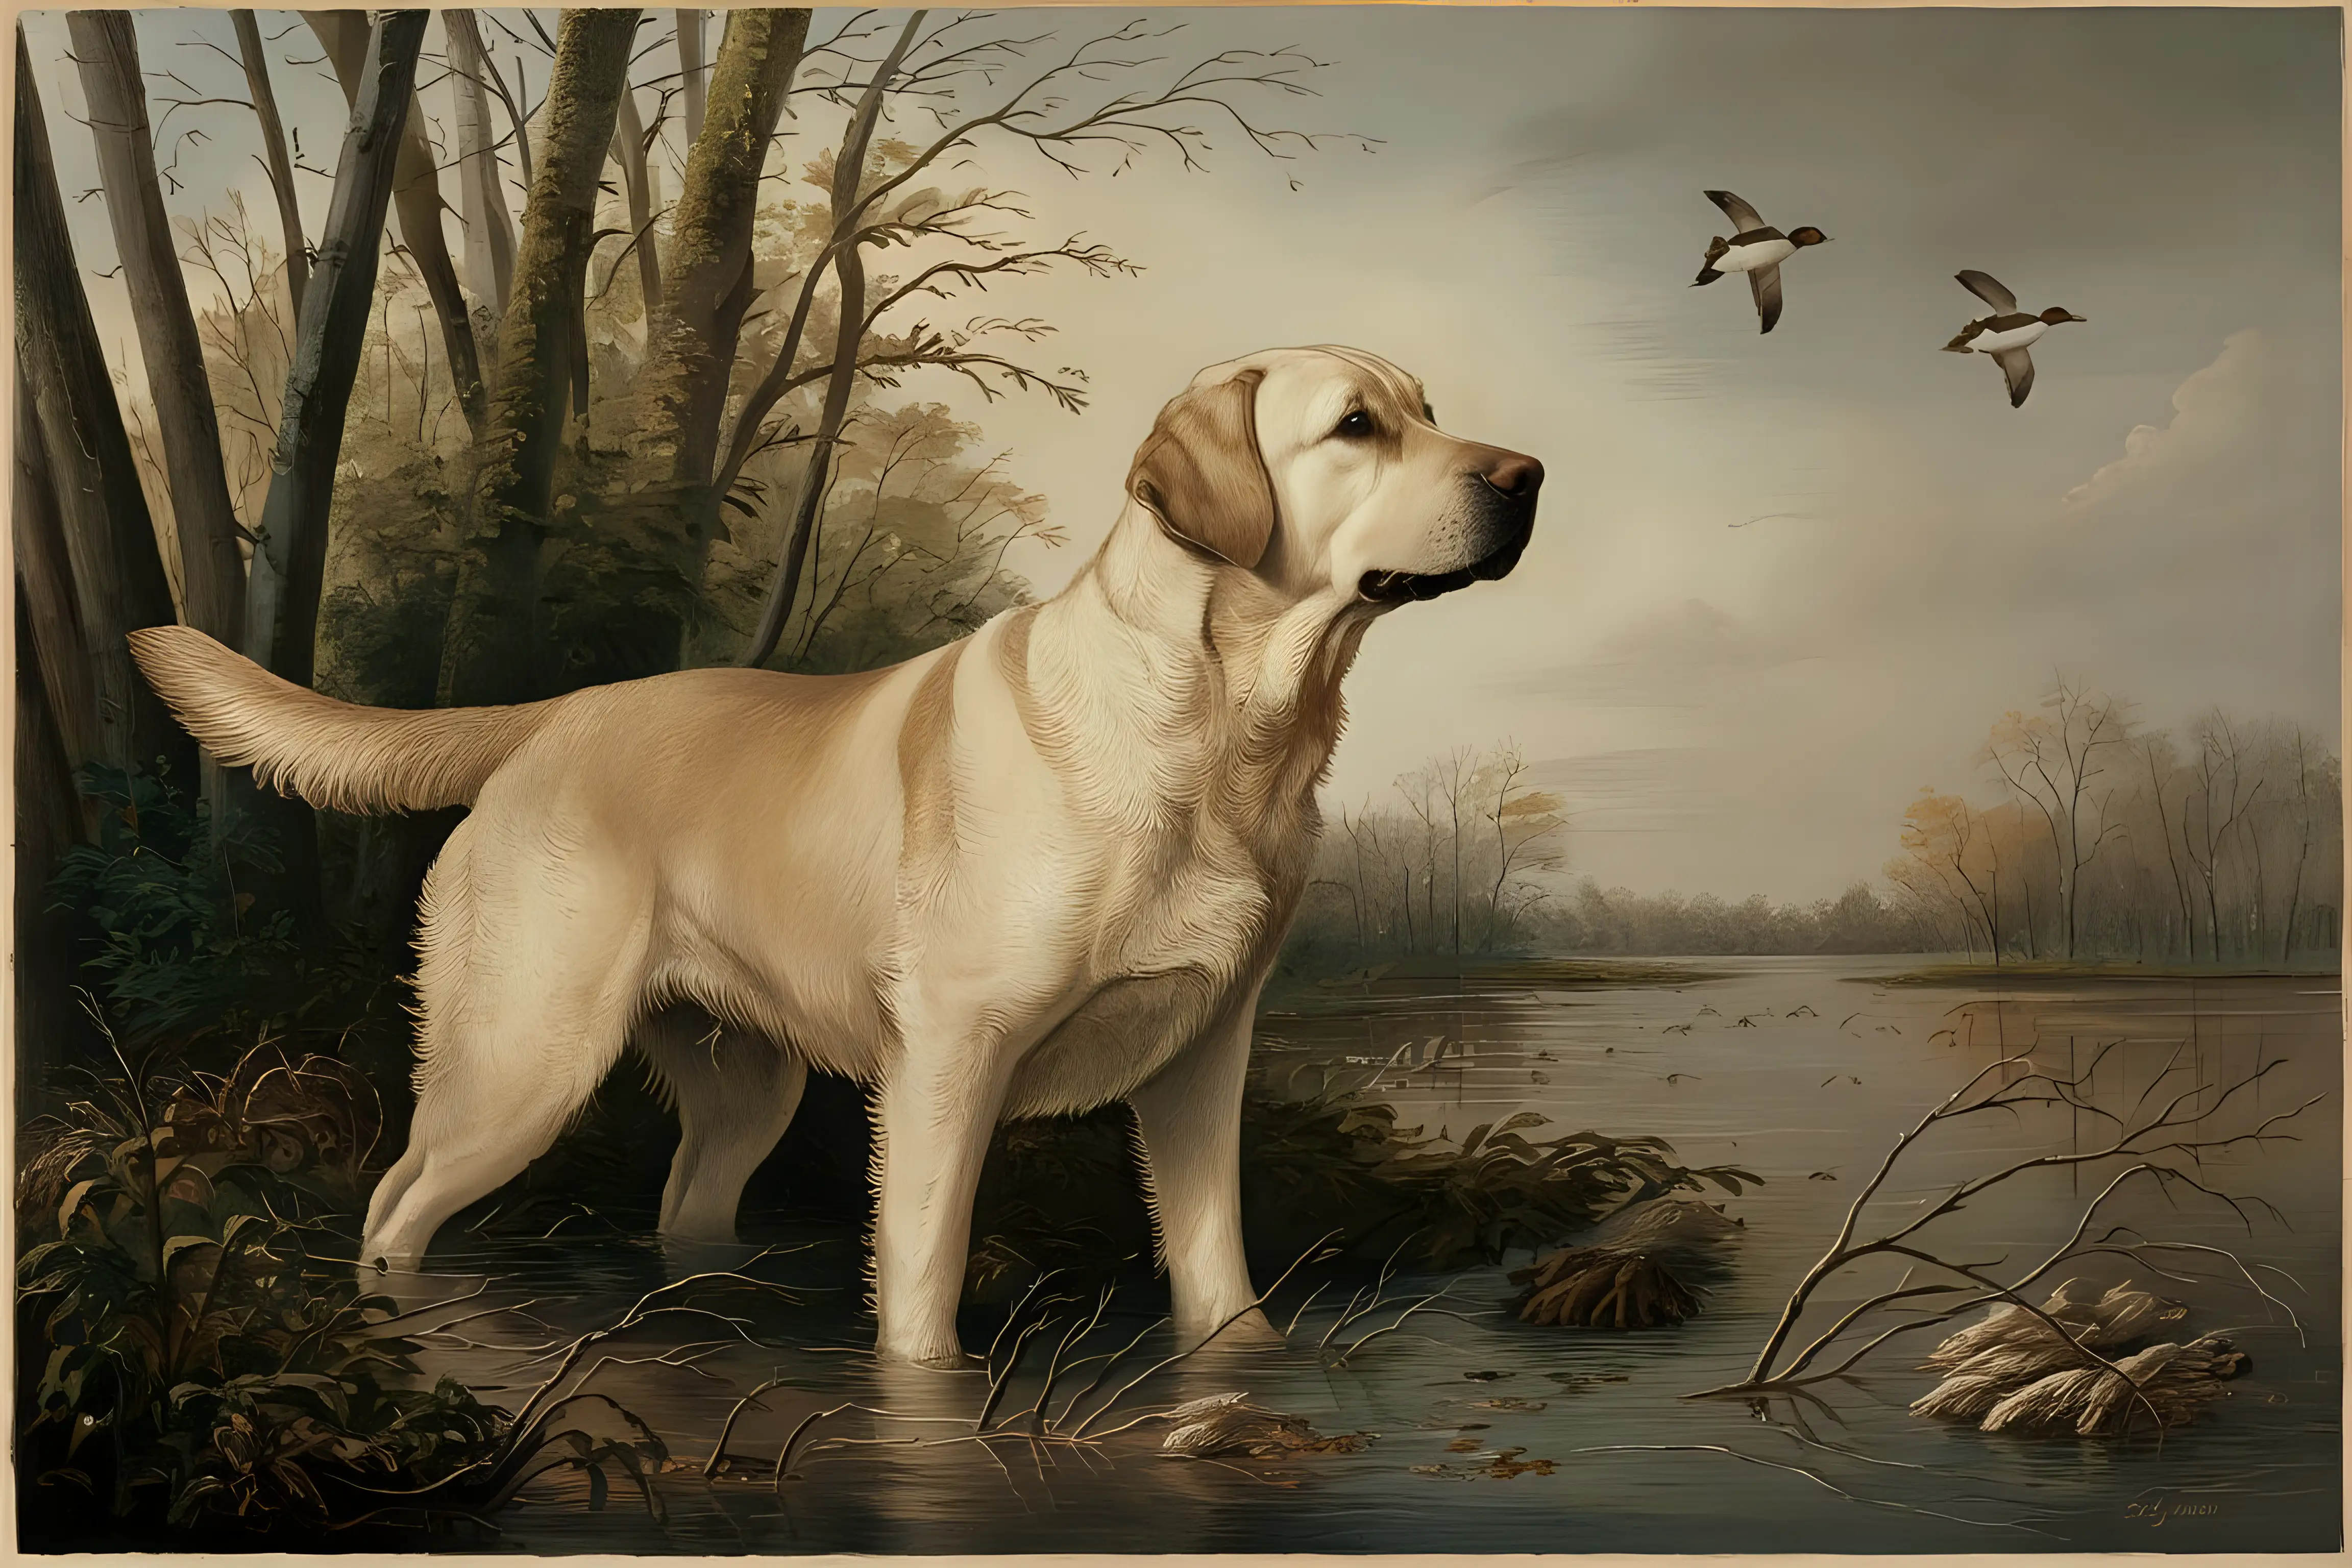 Patient Labrador Retriever in Flooded Timber with Flying Ducks